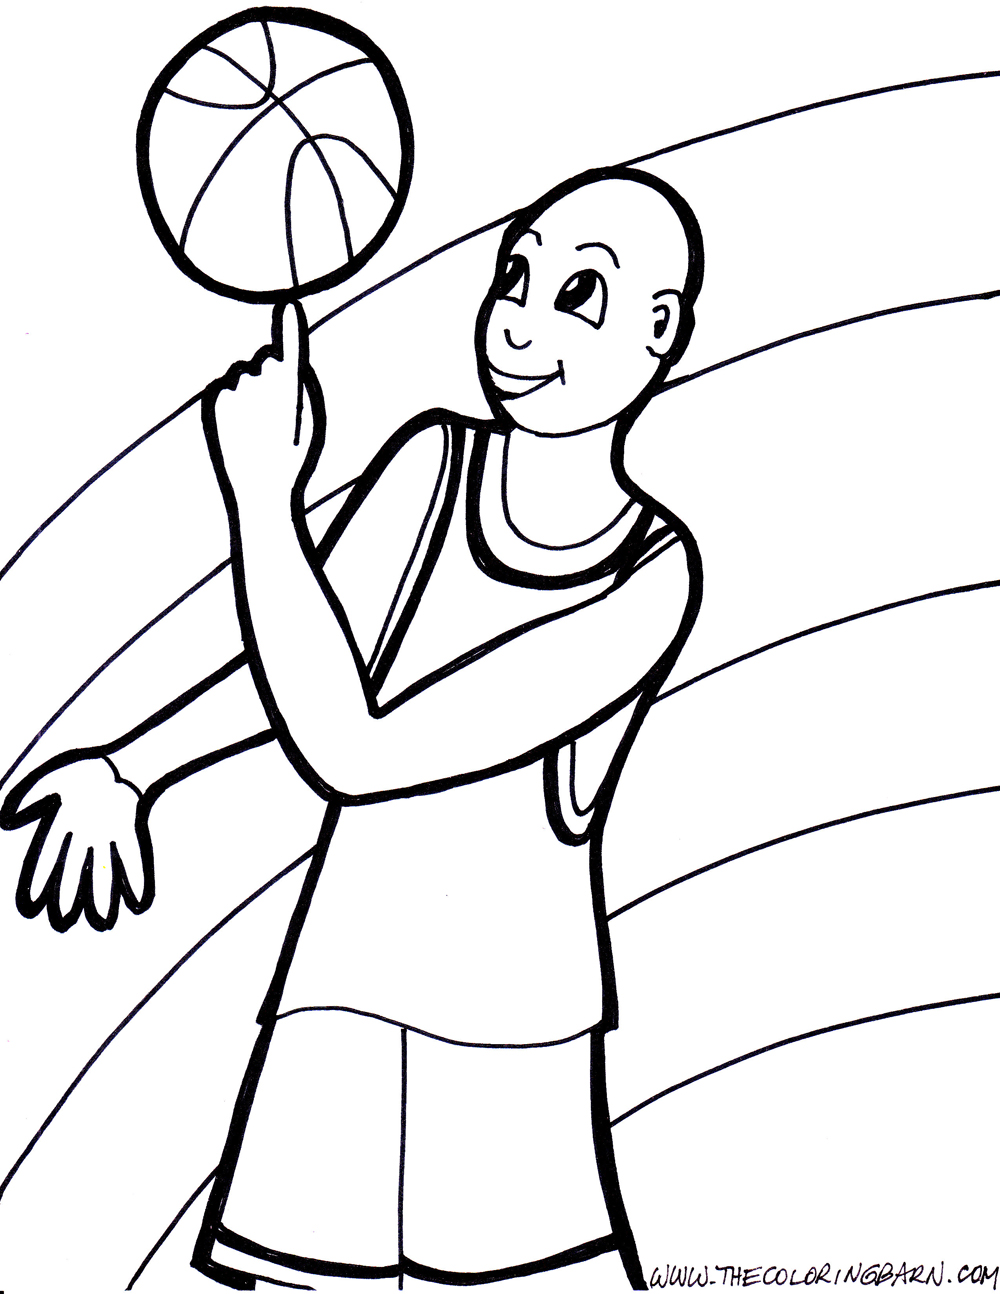  Basketball Teams Coloring pages – 4